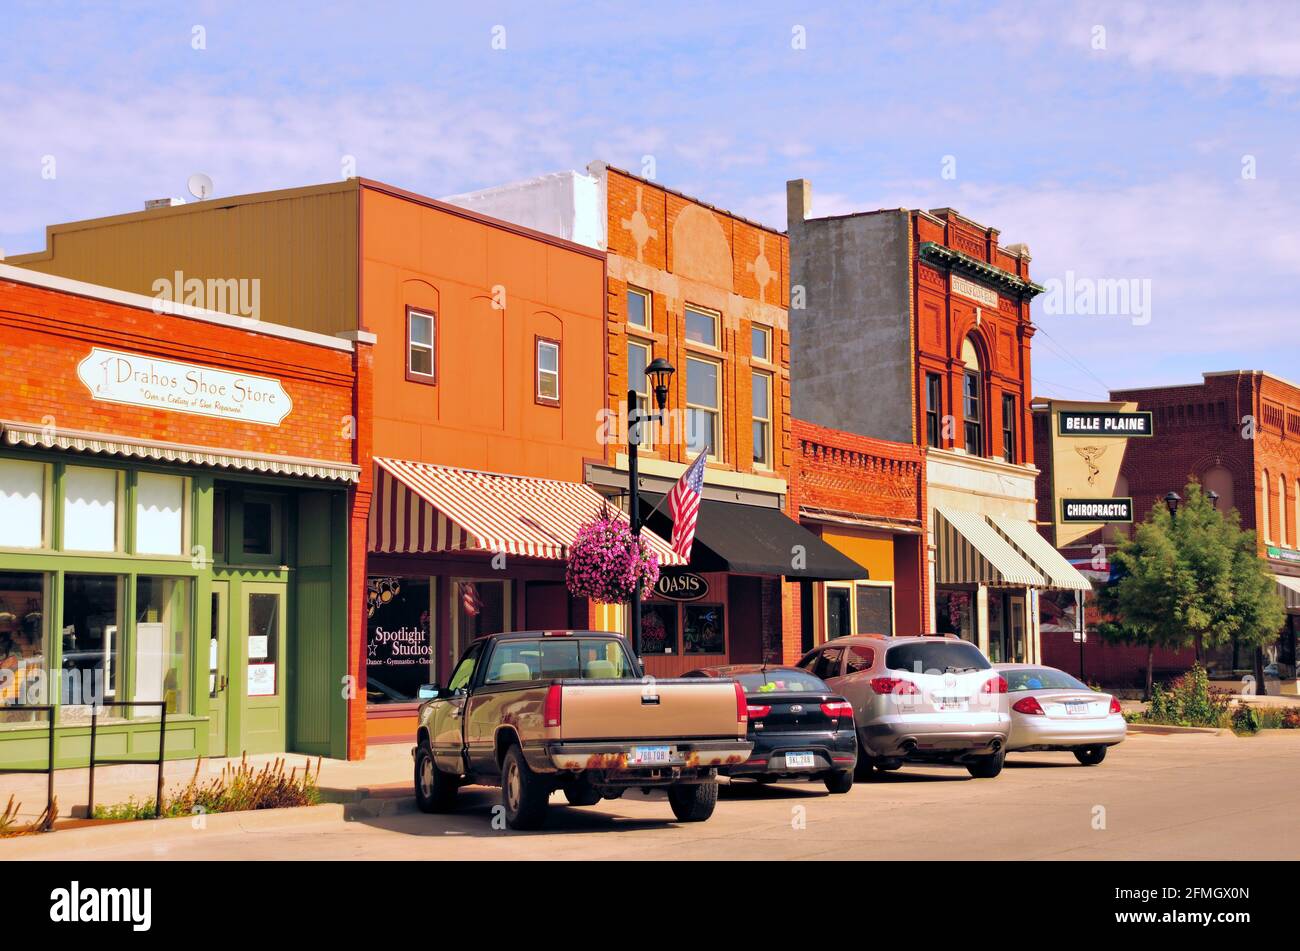 Belle Plaine, Iowa, USA. Main Street scene is typical of the architecture and feel of a small town in the Midwestern United States. Stock Photo